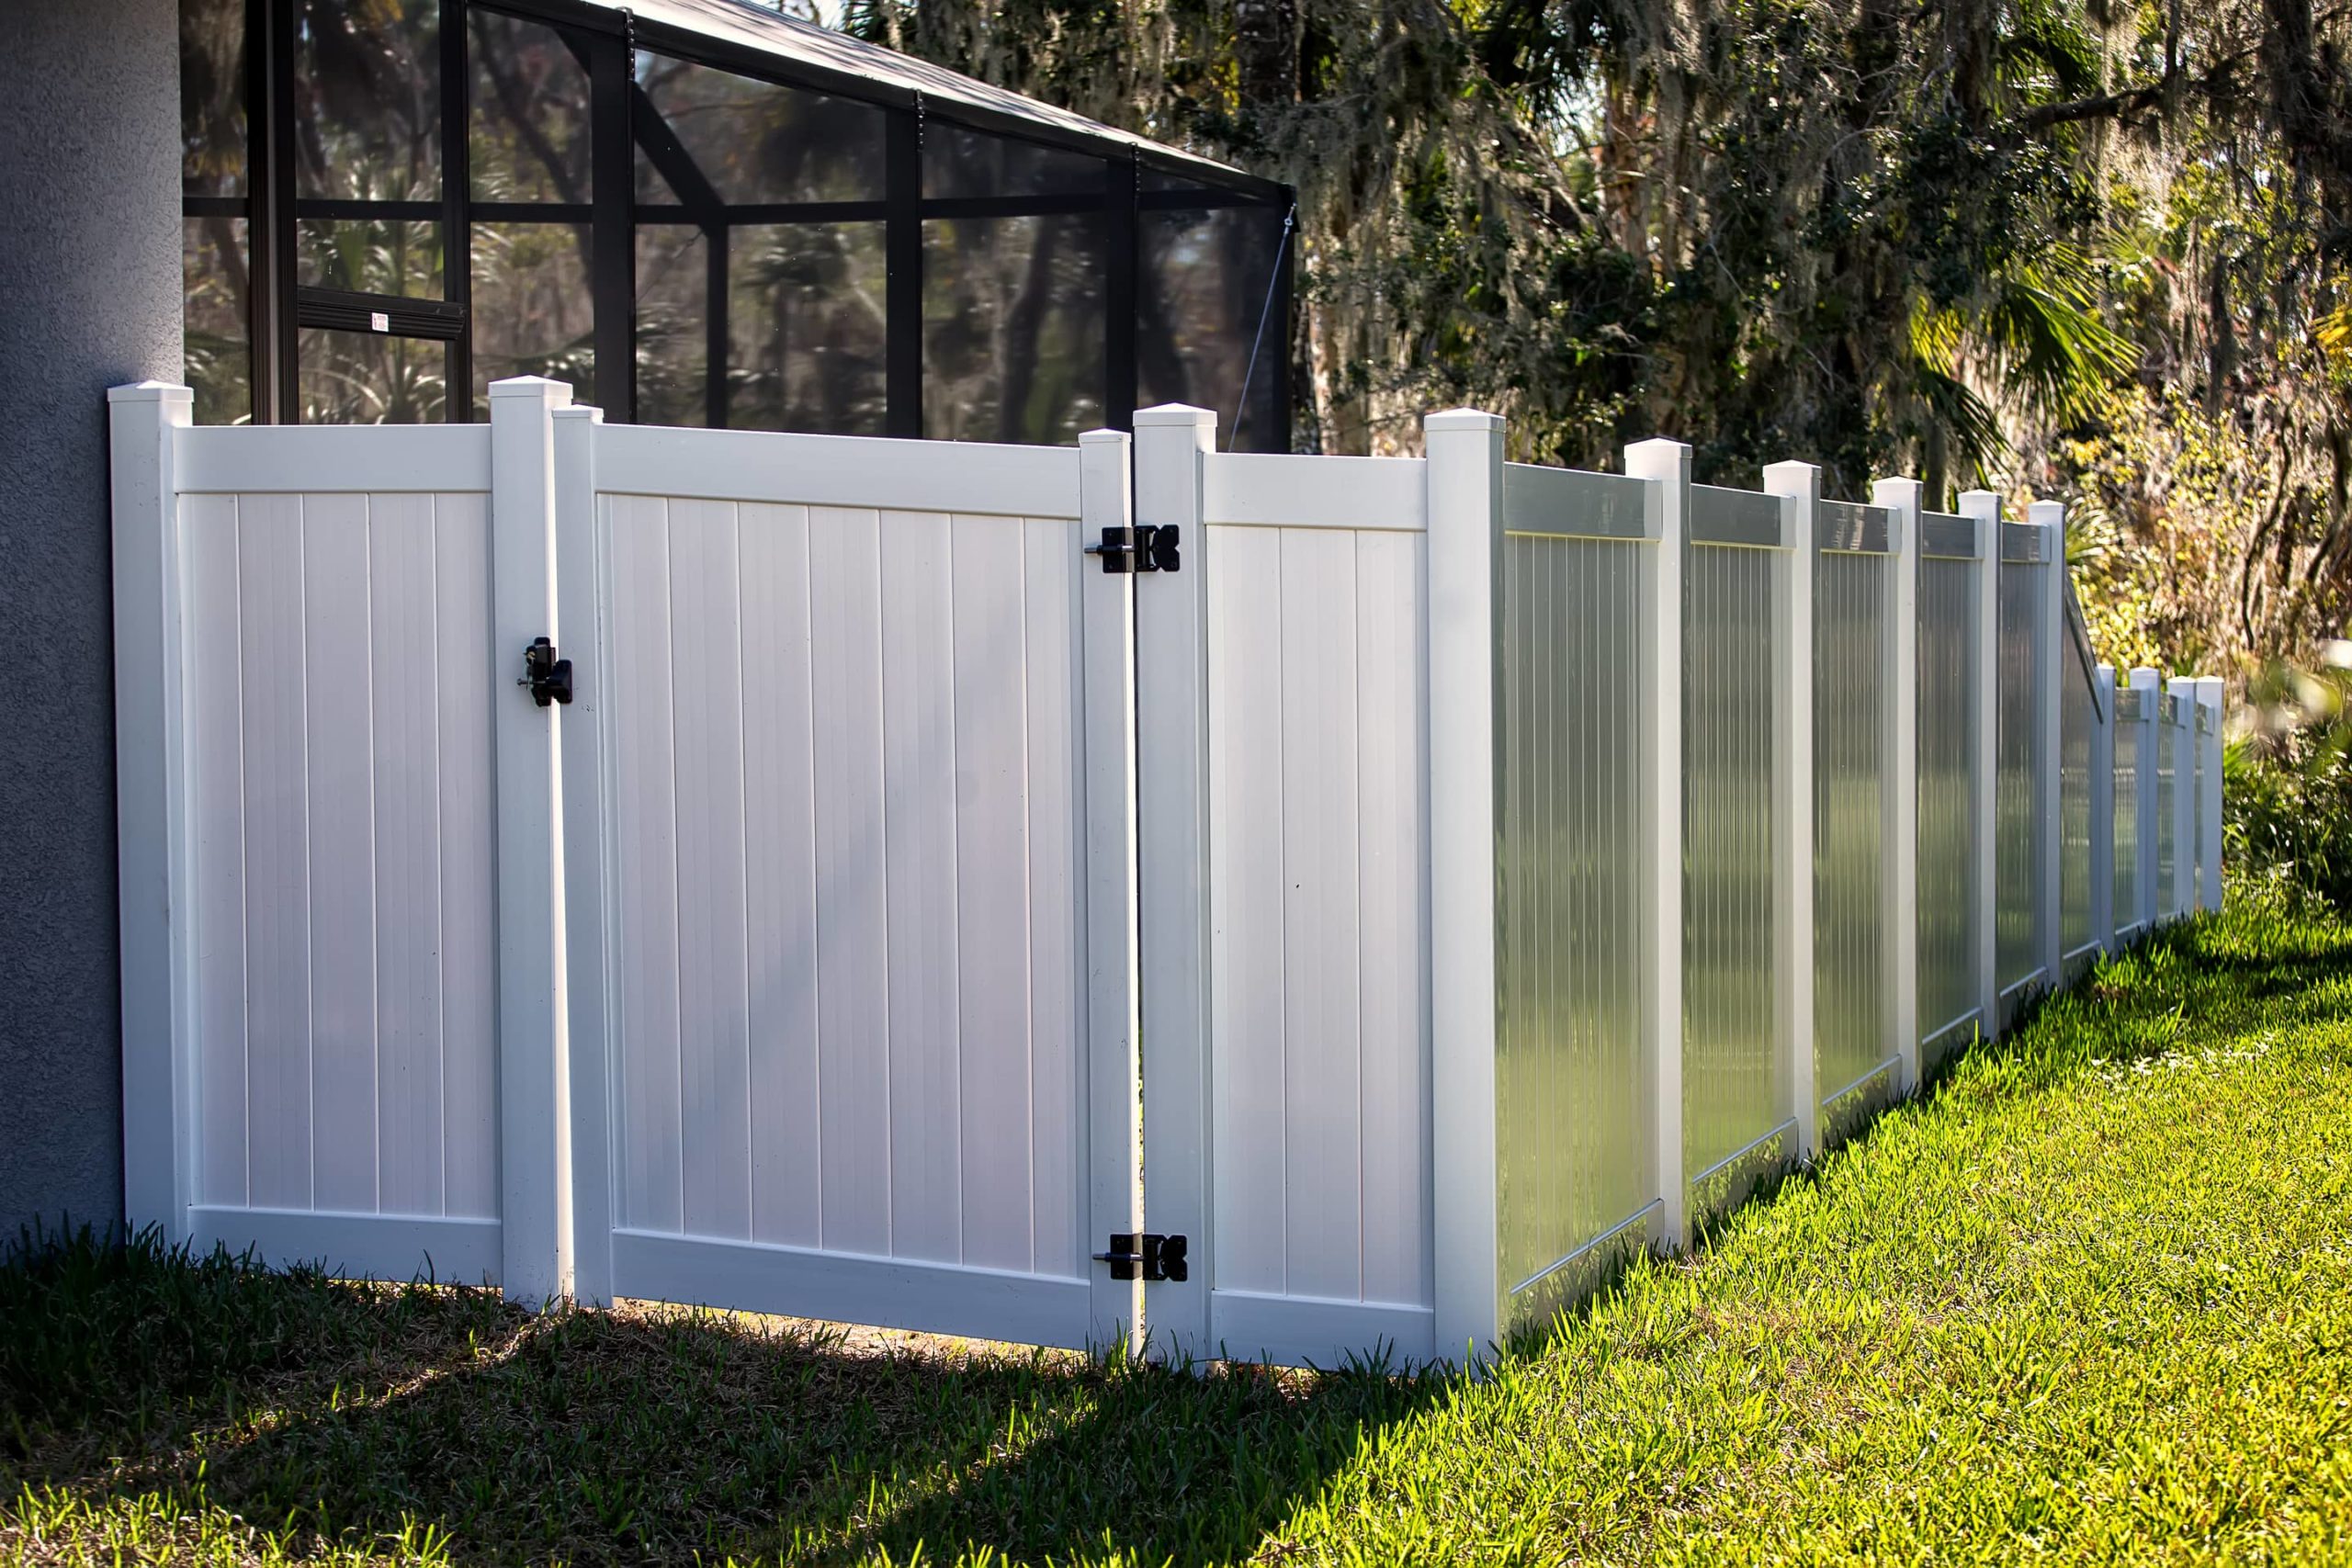 This is an image of a white plastic fence with a gate that opens.